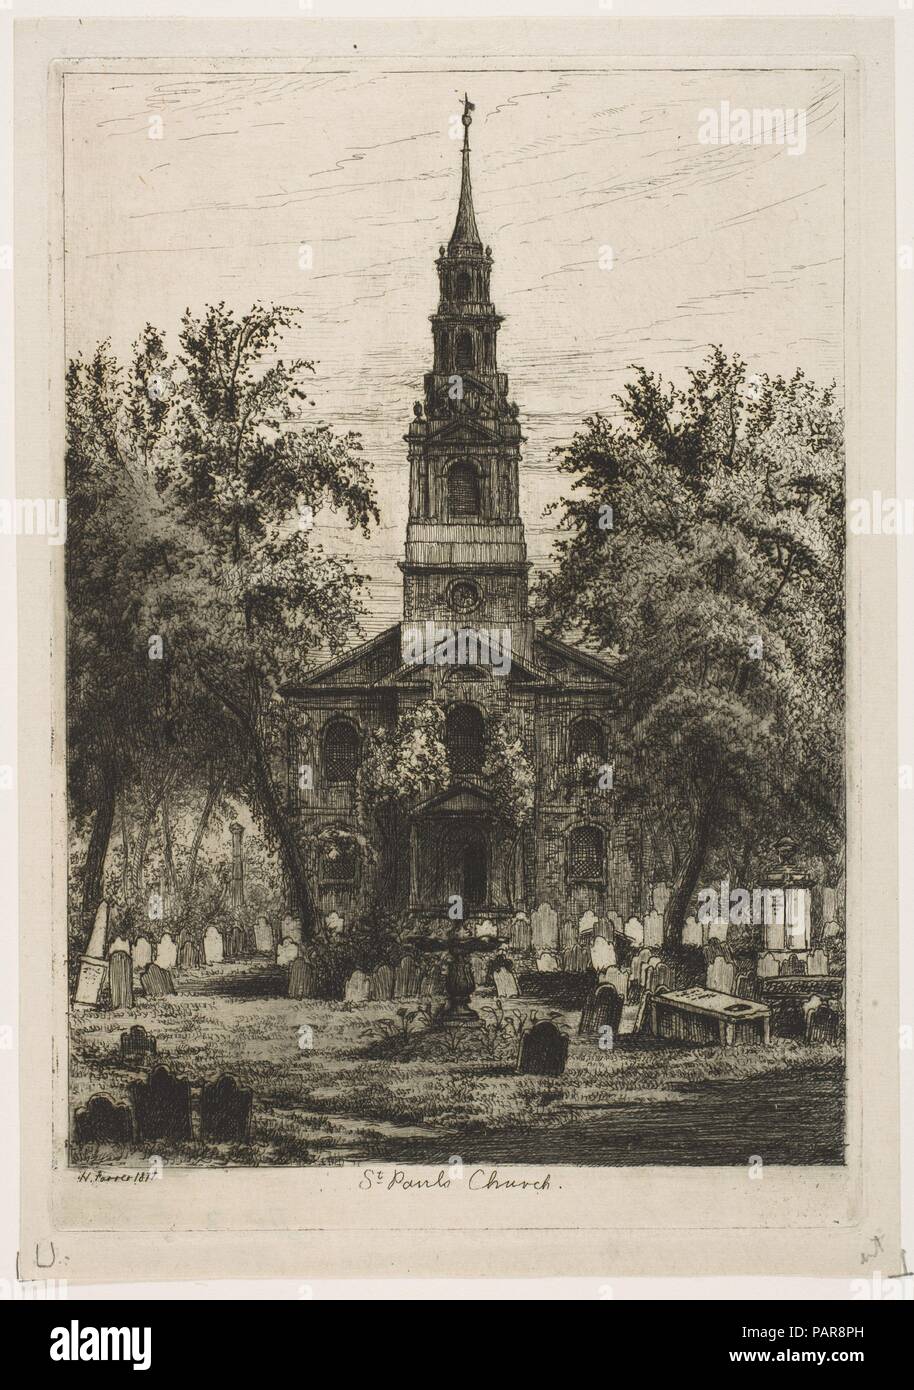 St. Paul's Chapel, New York (from Scenes of Old New York). Artist: Henry Farrer (American, London 1844-1903 New York). Dimensions: plate: 7 1/4 x 5 in. (18.4 x 12.7 cm)  sheet: 7 13/16 x 5 7/16 in. (19.8 x 13.8 cm). Date: 1877. Museum: Metropolitan Museum of Art, New York, USA. Stock Photo